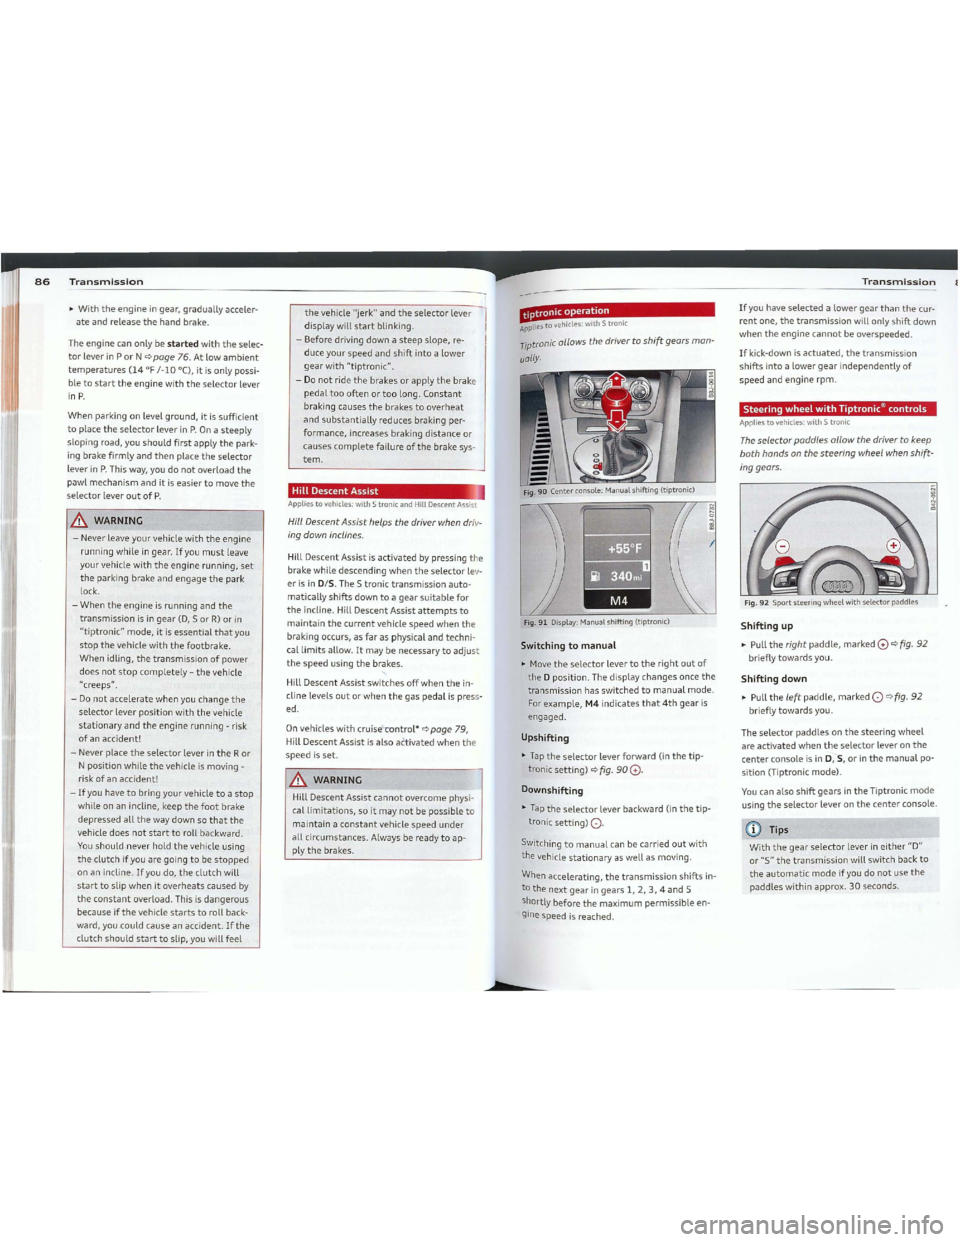 AUDI TT 2012  Owners Manual Downloaded from www.Manualslib.com manuals search engine Fig.91Display:Manualshifting (tiptronicl
((DTips
Withthegearselectorleverineither"0"
or"5"thetransmissionwiLLswitchbackto
theautomaticmodeifyou